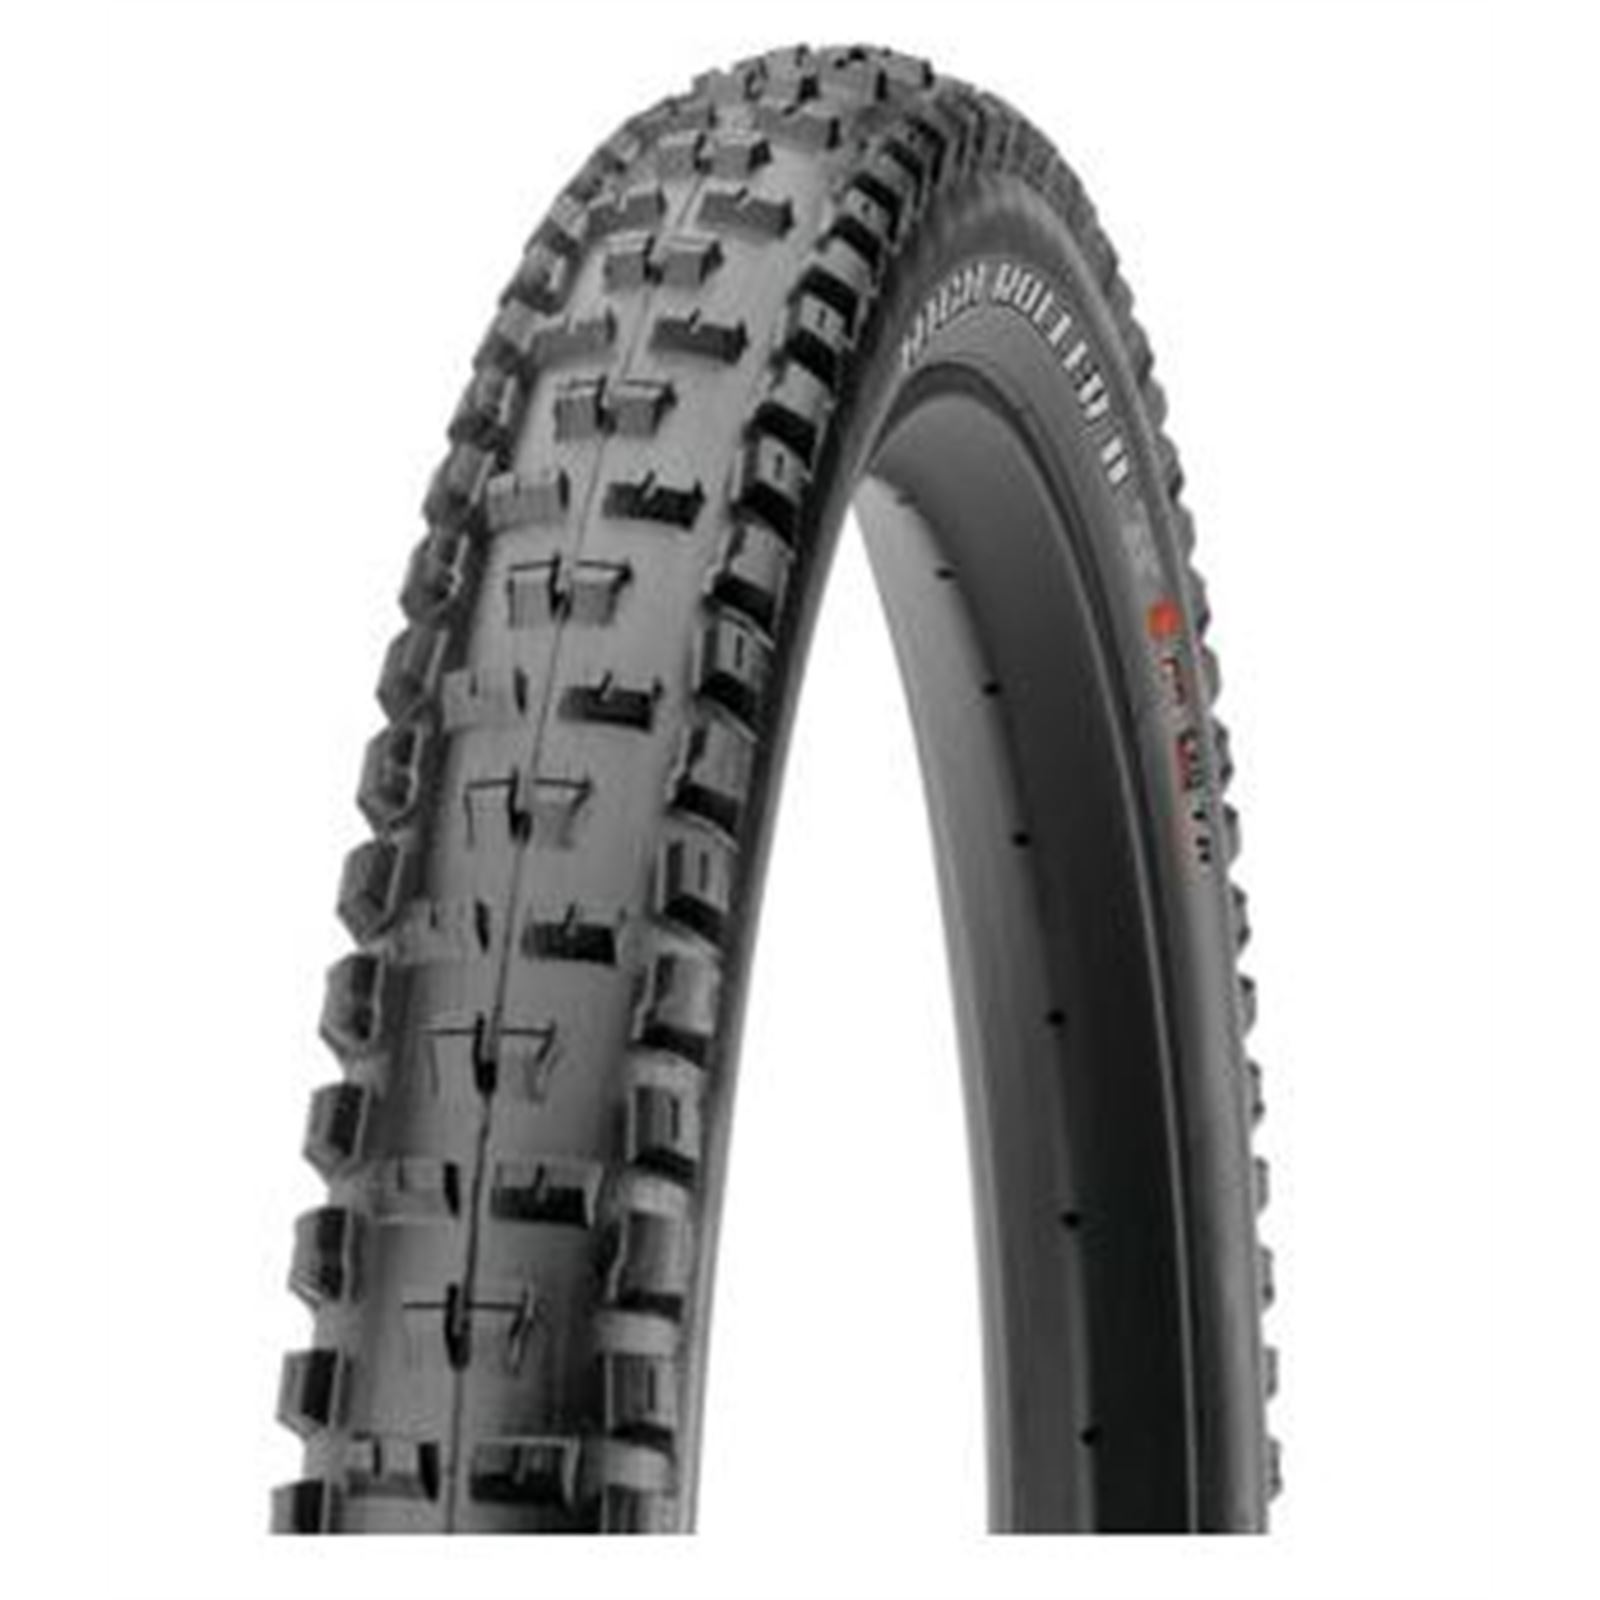 Maxxis Tire High Roller II 27.50x2.60, 120 TPI